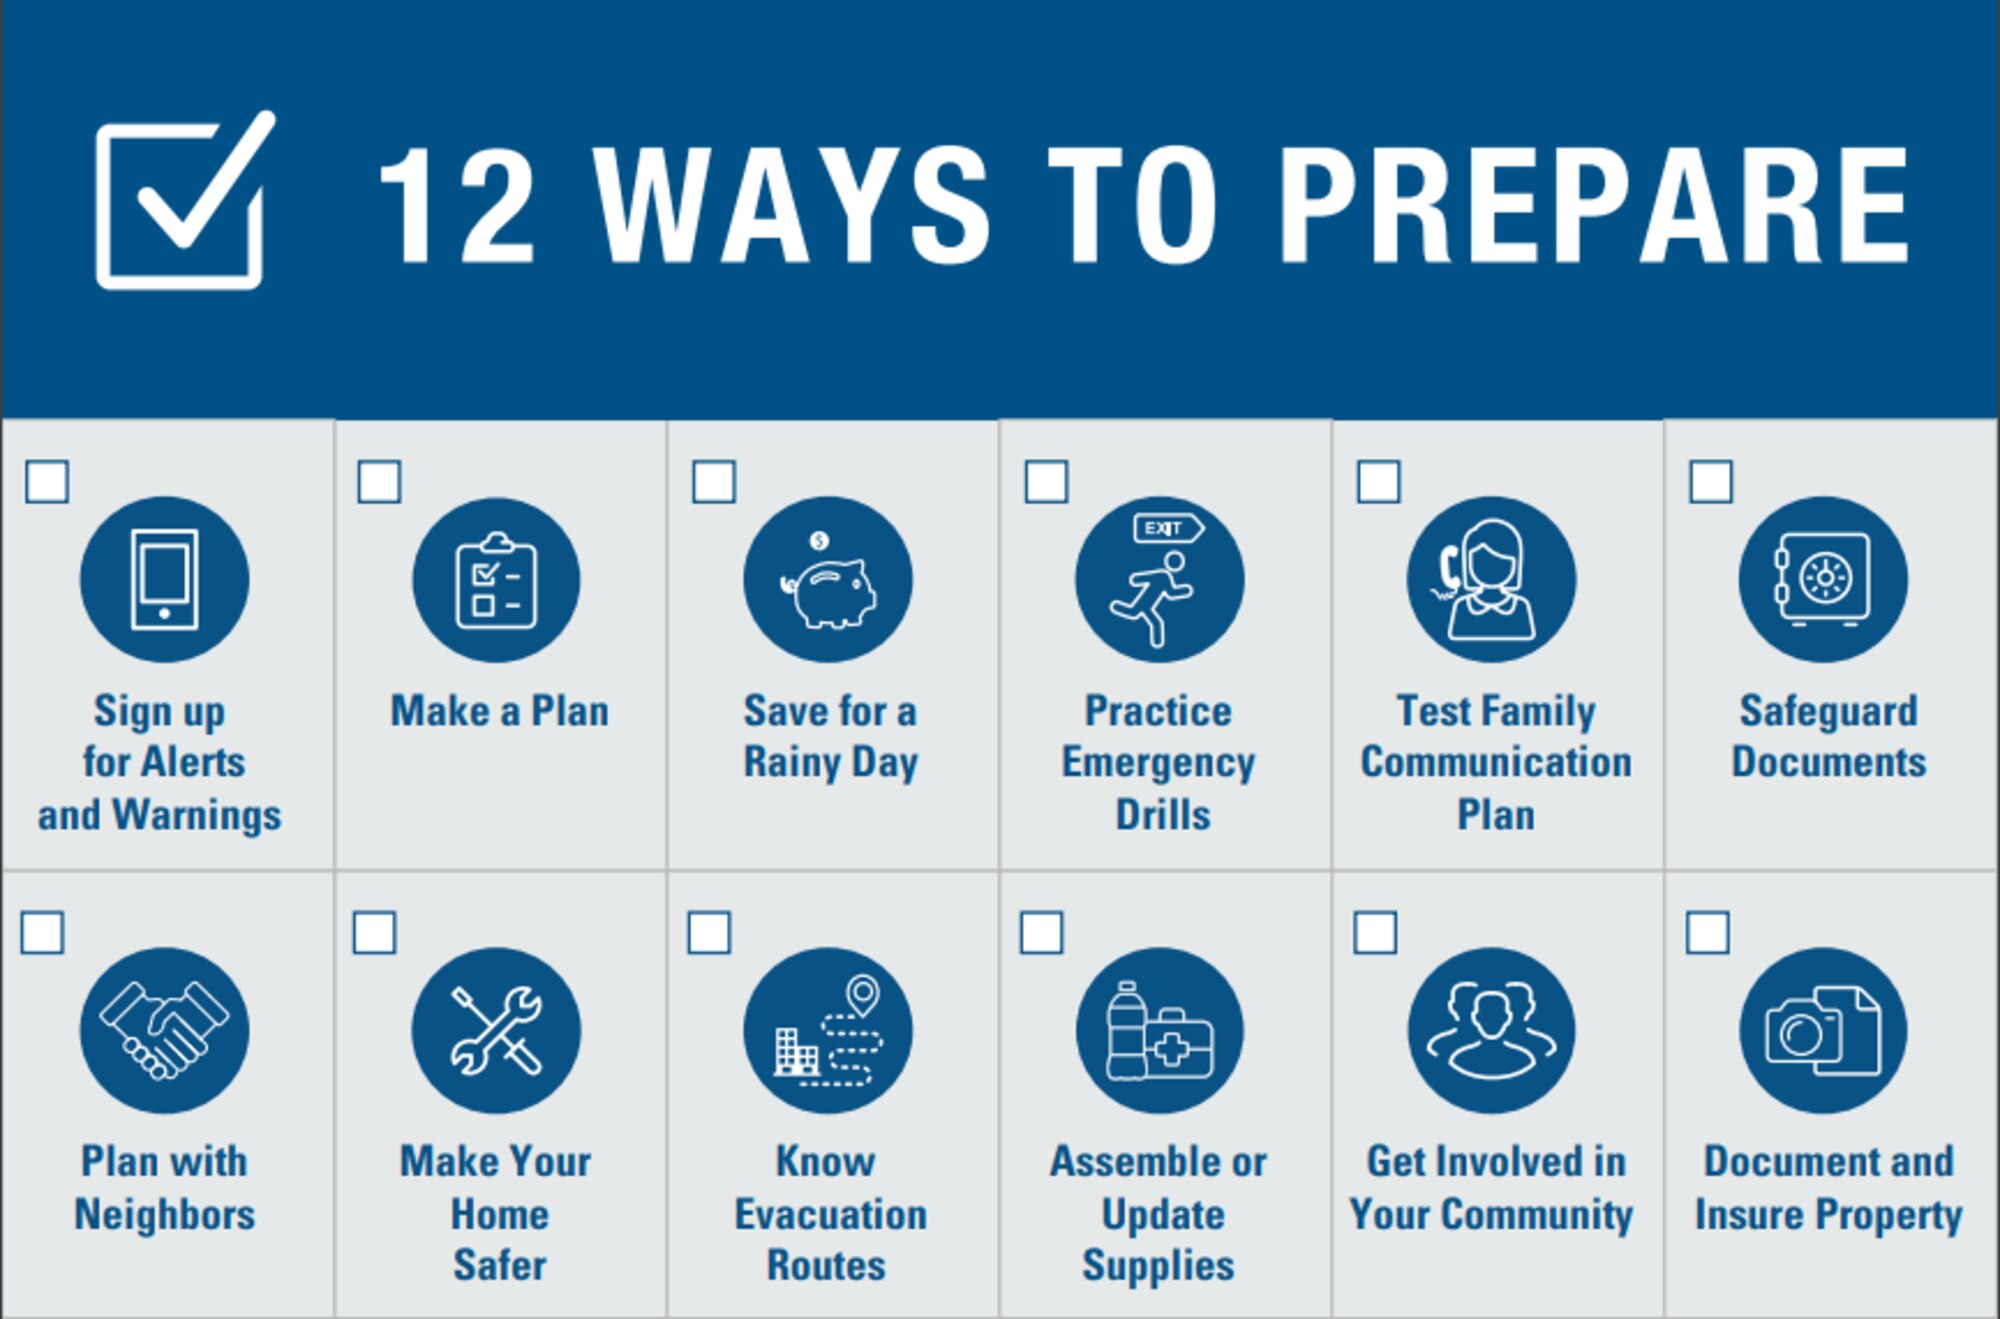 September is National Preparedness Month! Occurring every September, National Preparedness Month is observed to increase preparedness for disasters and raise awareness for just how important it is to be prepared.